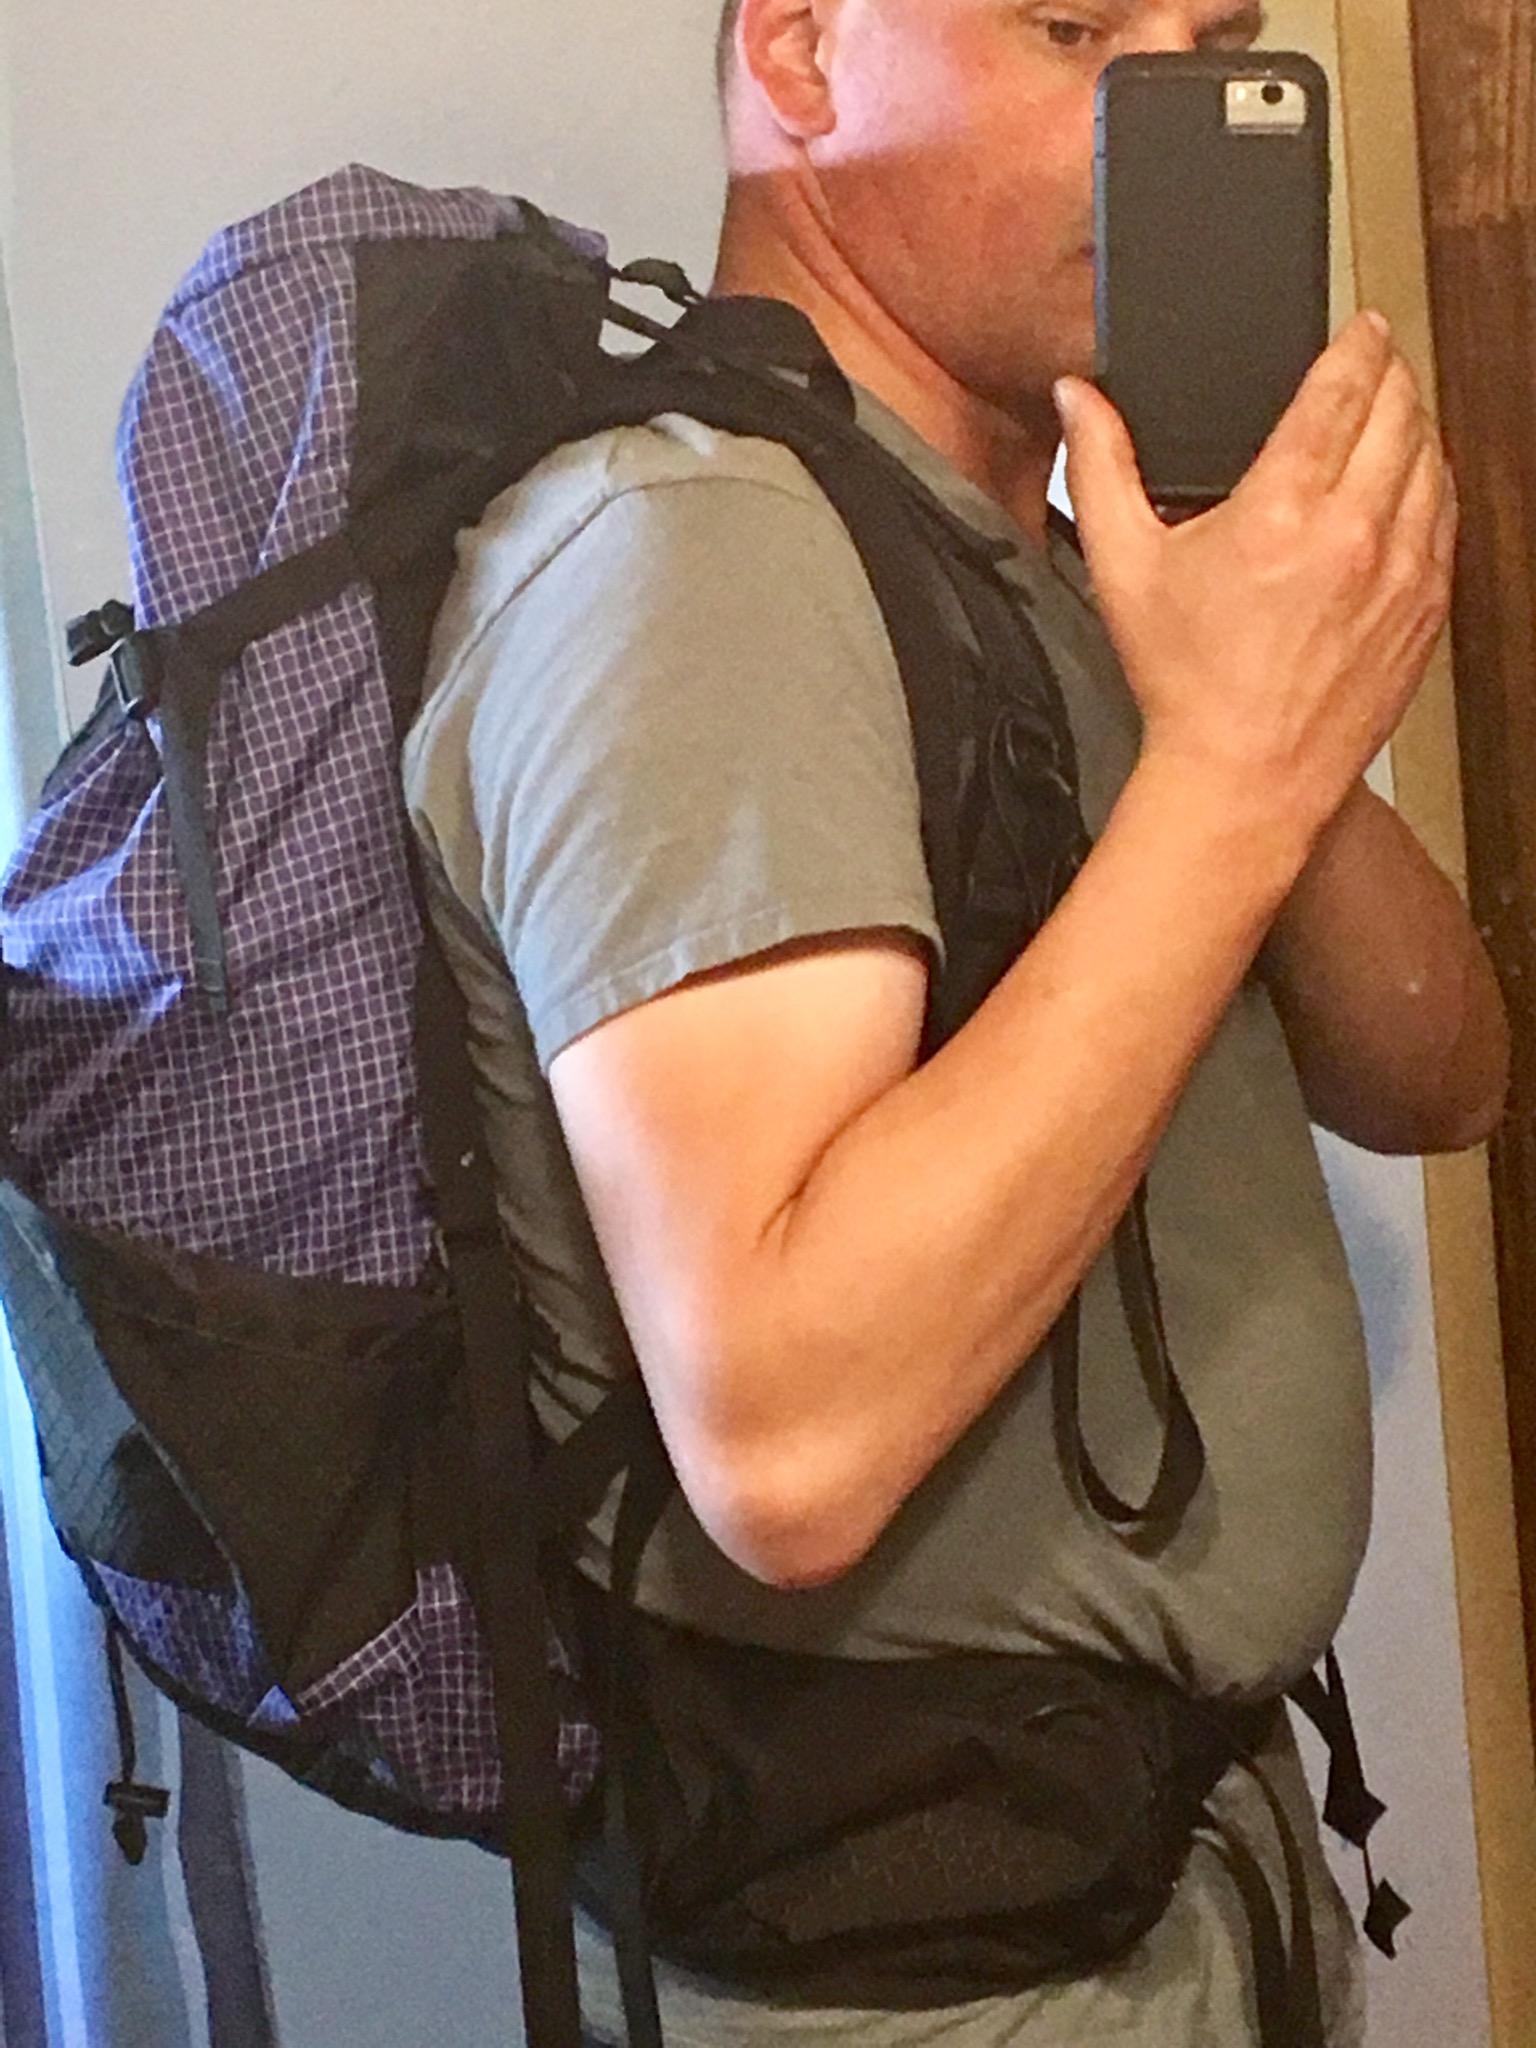 ULA Circuit Pack Fit - Backpacking Light